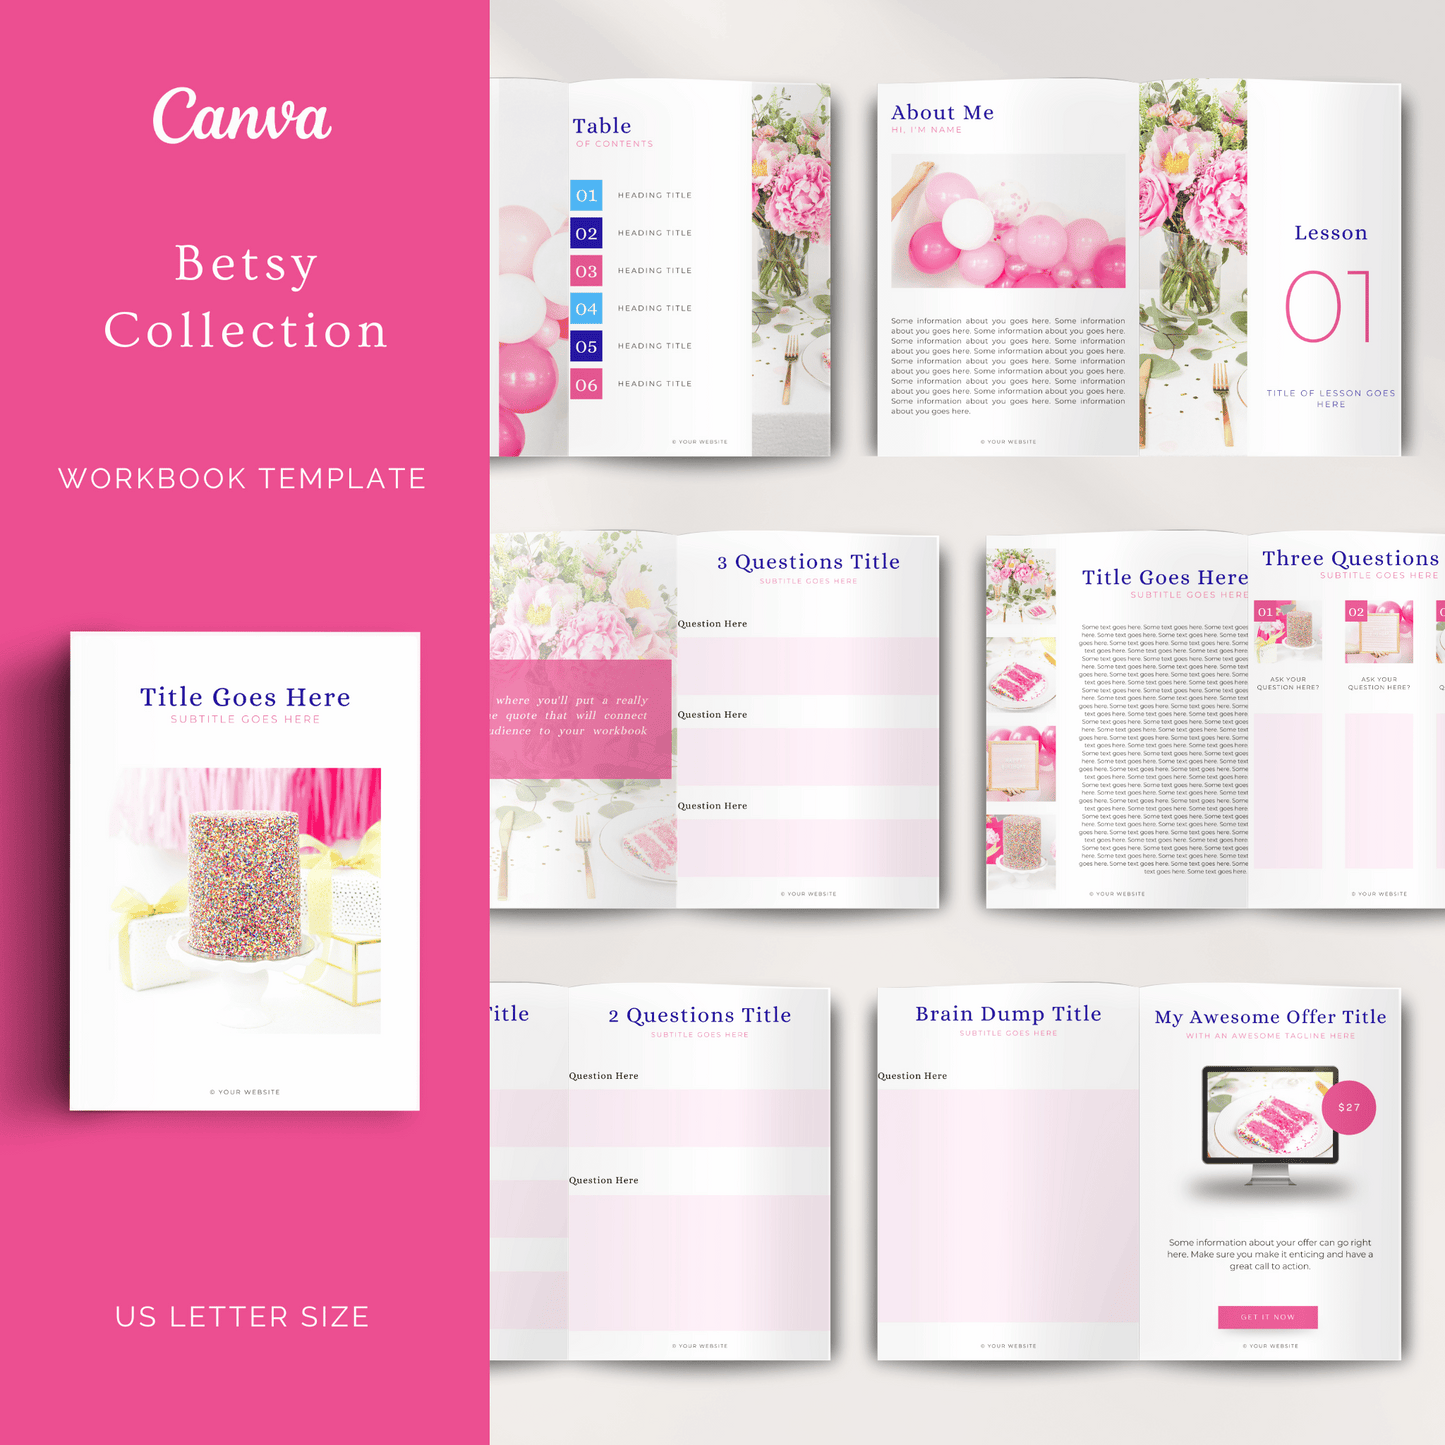 Betsy Collection Workbook Template